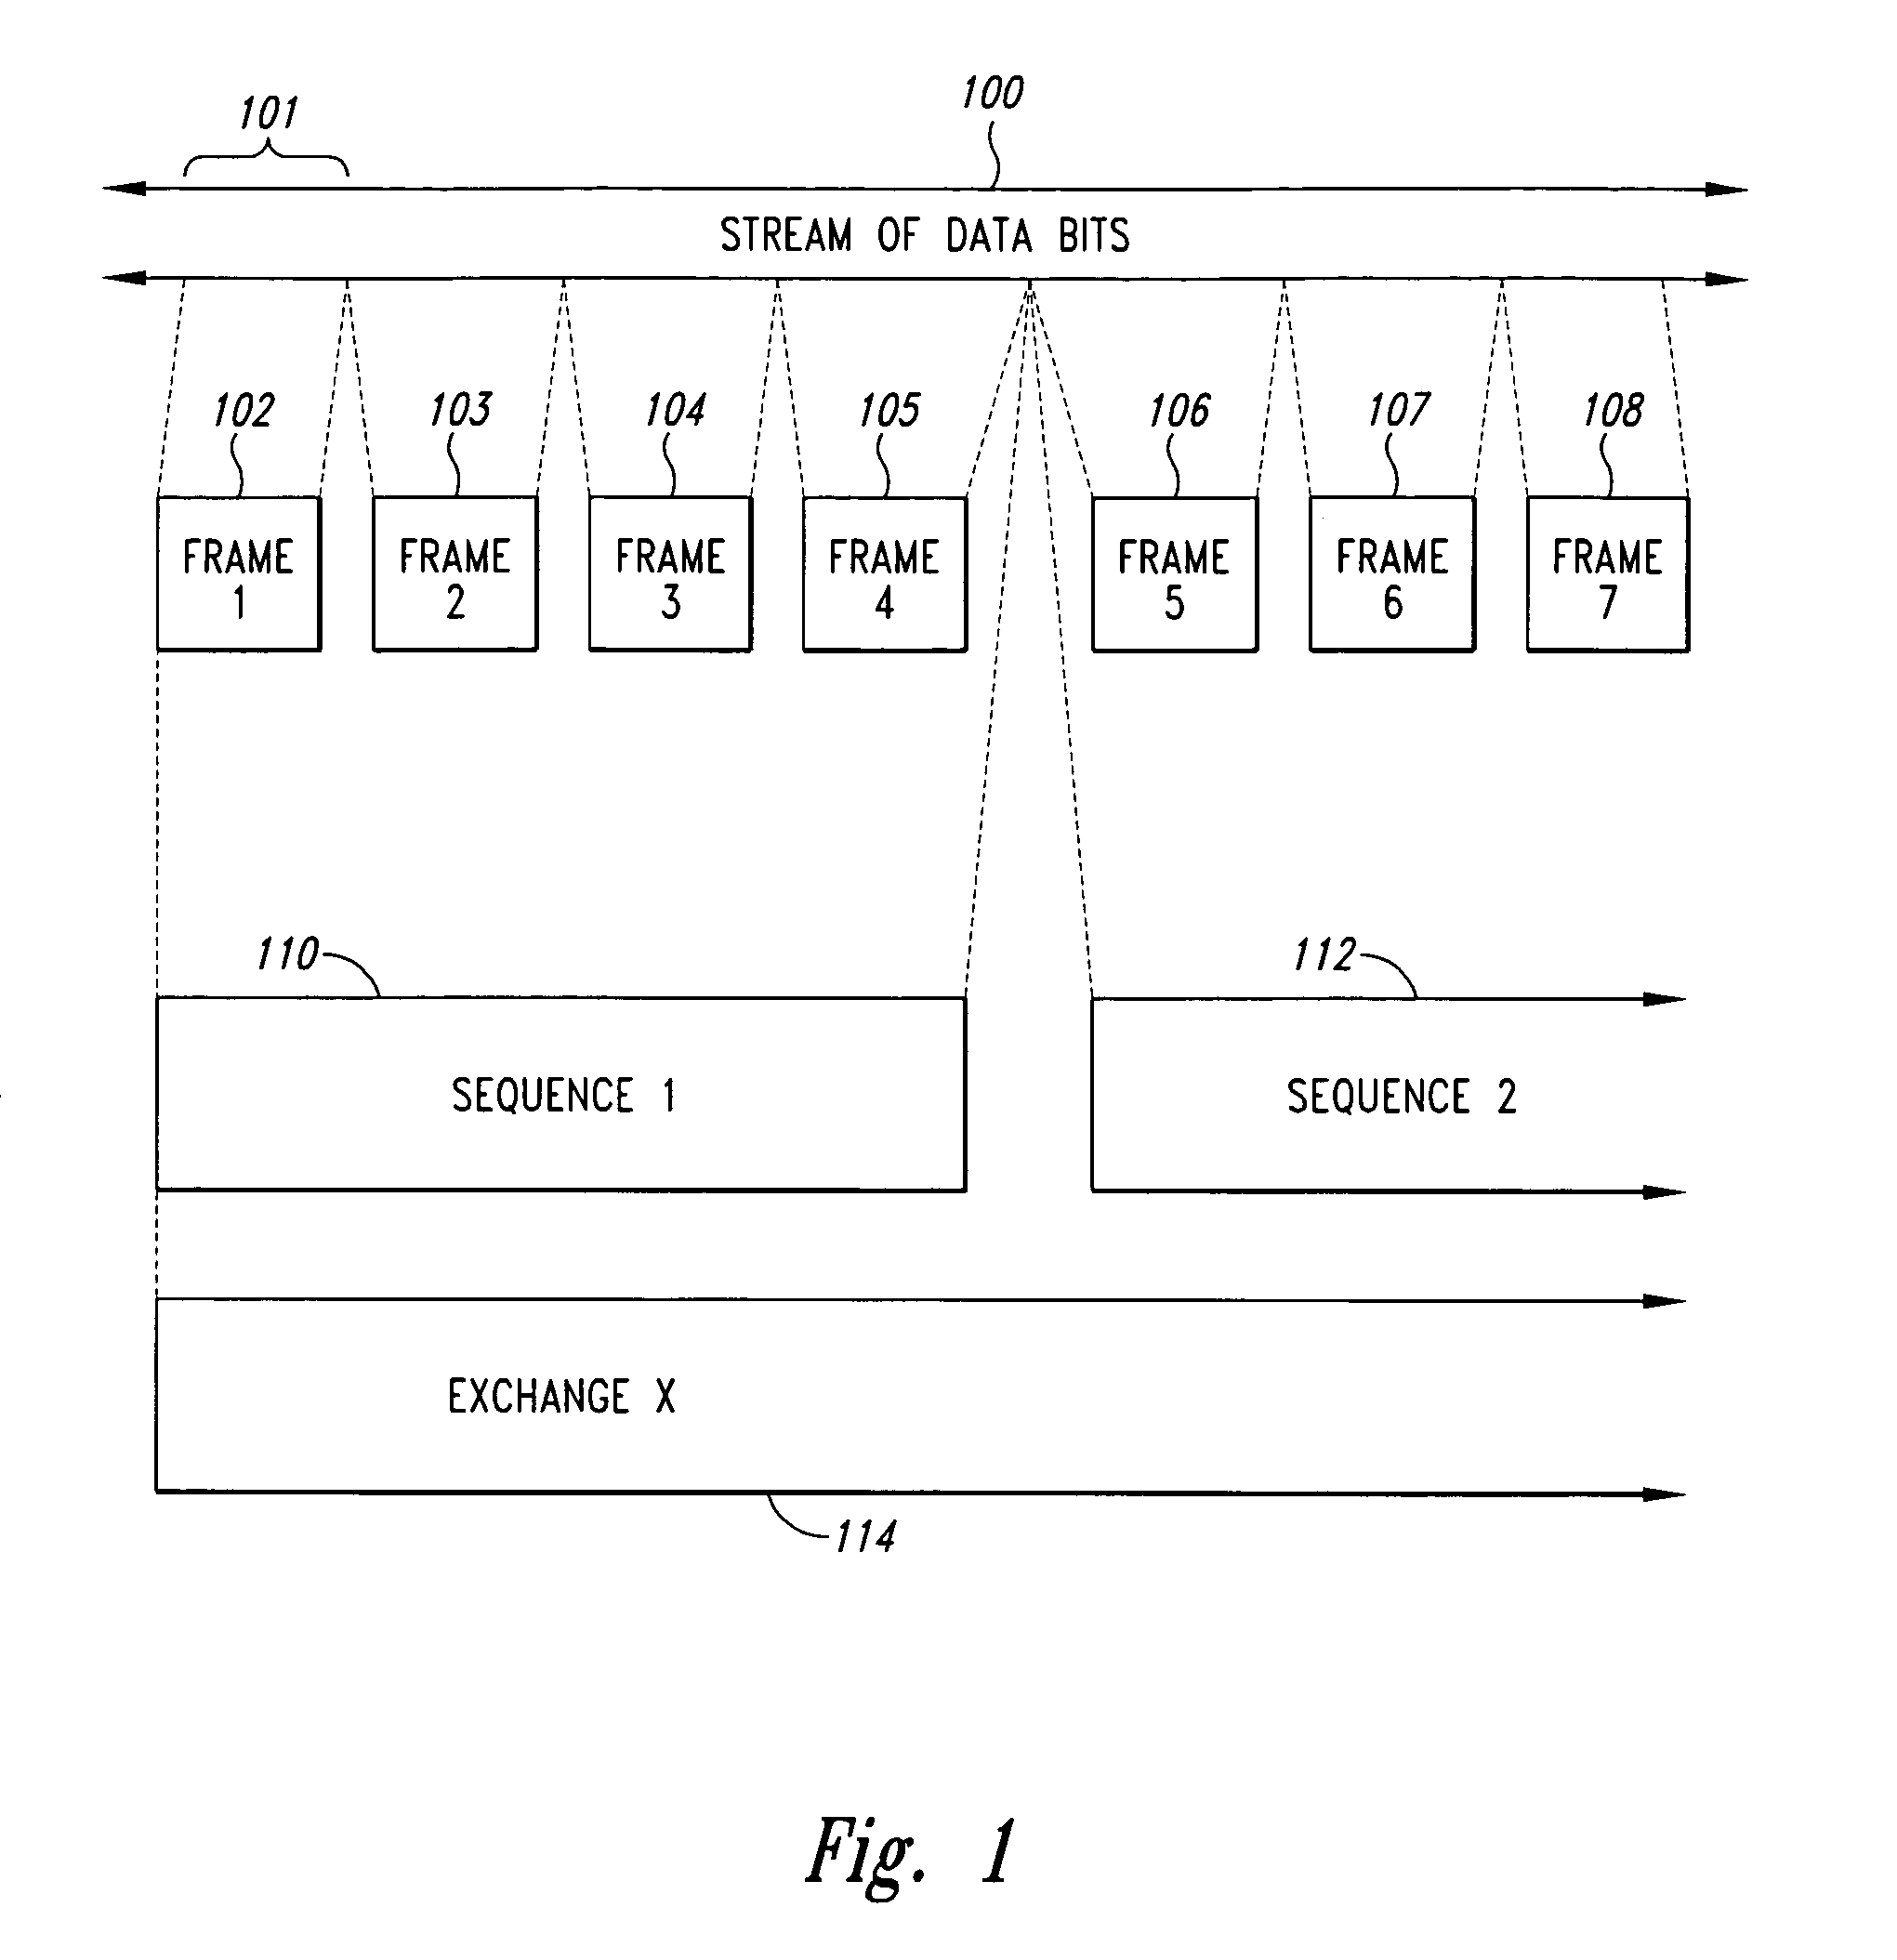 Method and system increasing performance substituting finite state machine control with hardware-implemented data structure manipulation